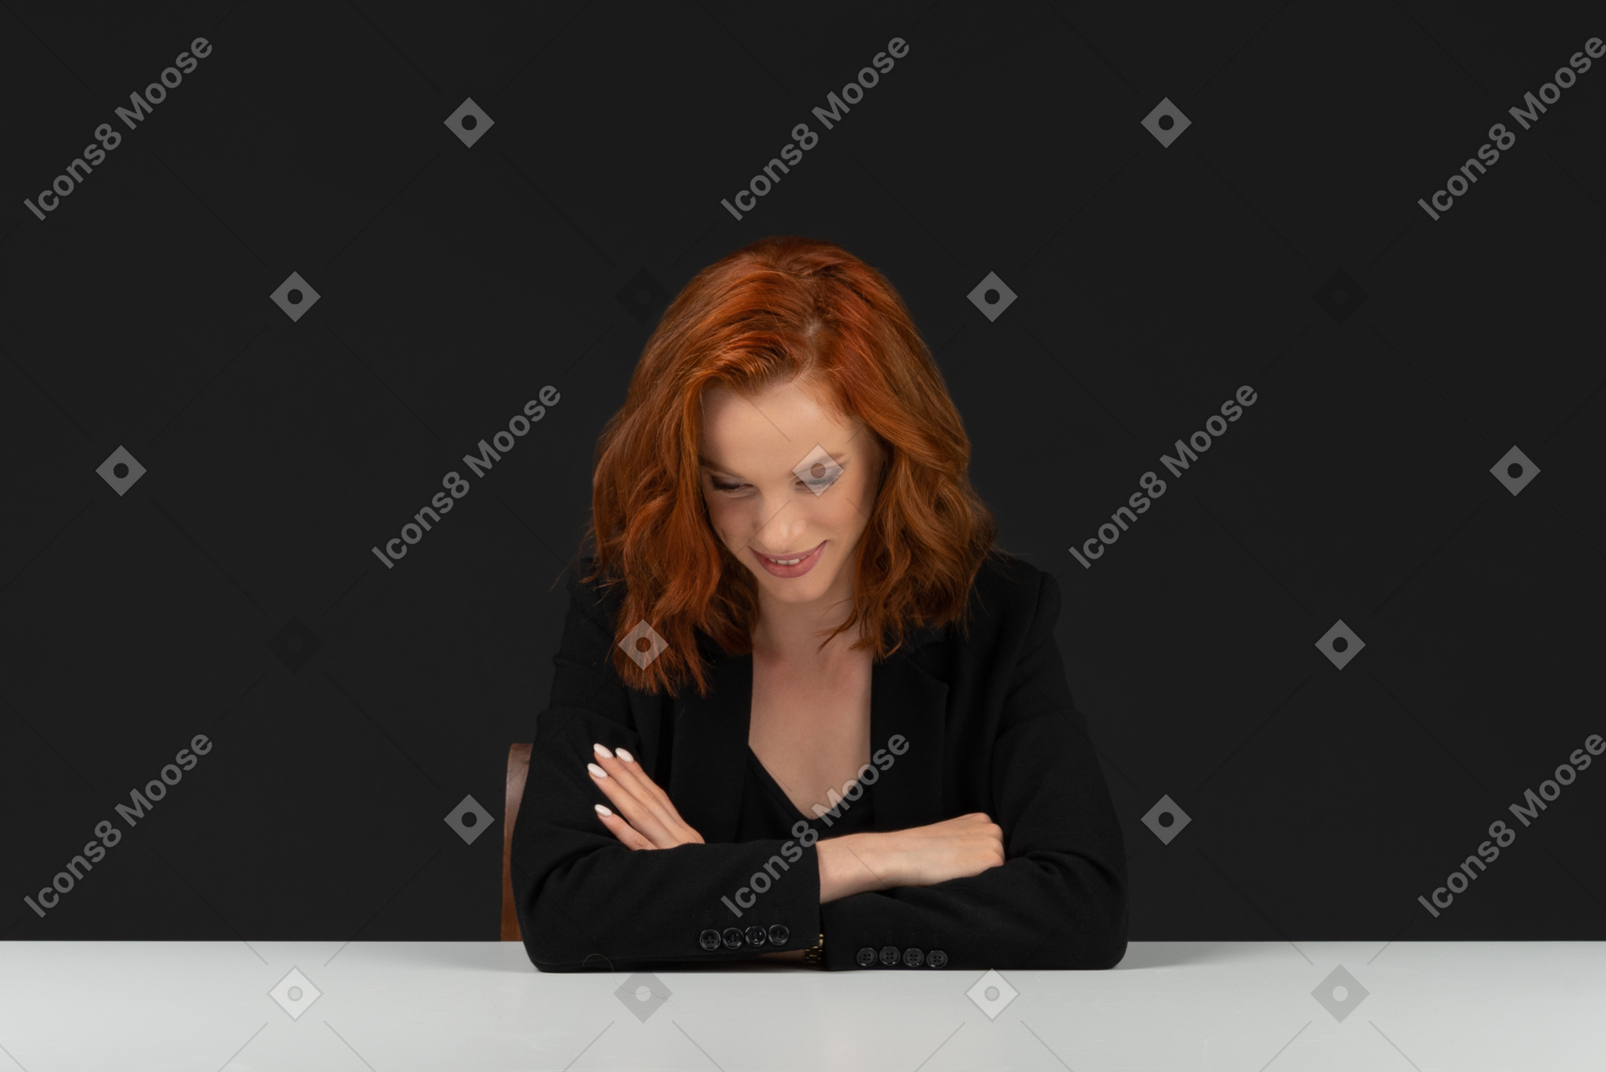 A frontal view of the beautiful girl sitting at the table and smiling